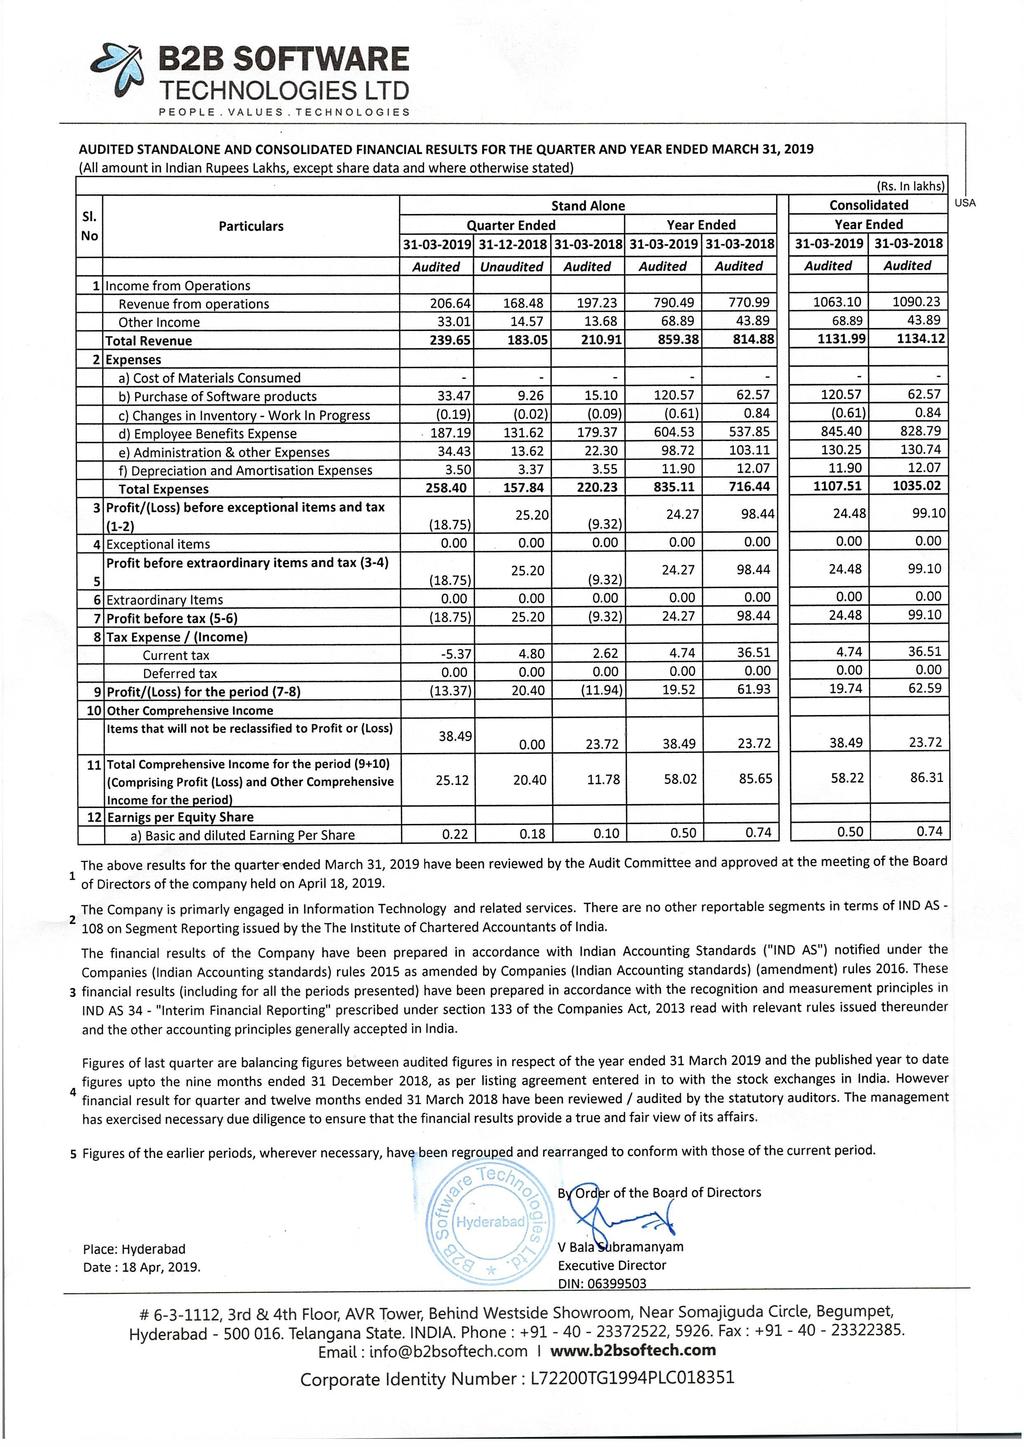 B2B SOFTWARE TECHNOLOGIES LTD AUDITED STANDALONE AND CONSOLIDATED FINANCIAL RESULTS FOR THE QUARTER AND YEAR ENDED MARCH 31, 2019 (All amount in Indian Rupees Lakhs, except share data and where